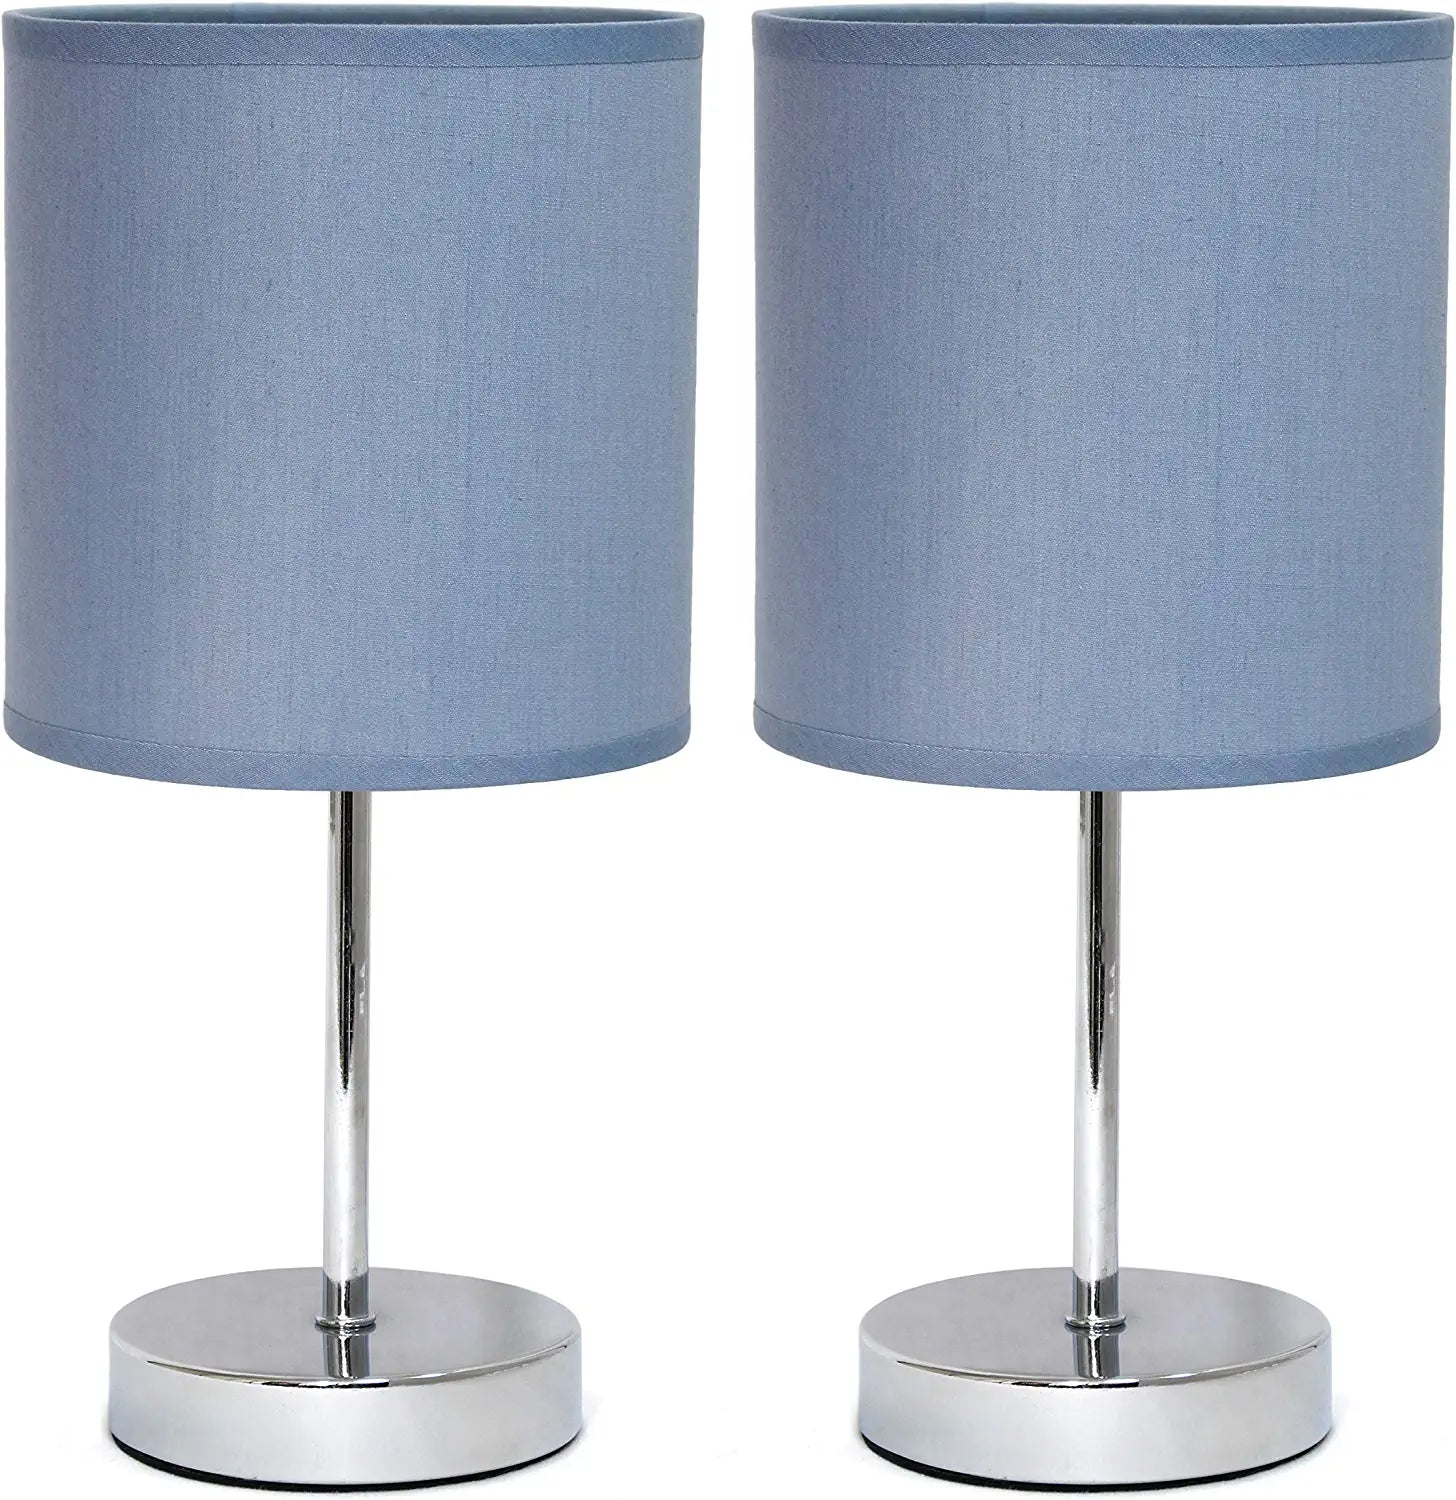 Simple Designs Chrome Mini Basic Table Lamp with Fabric Shade 2